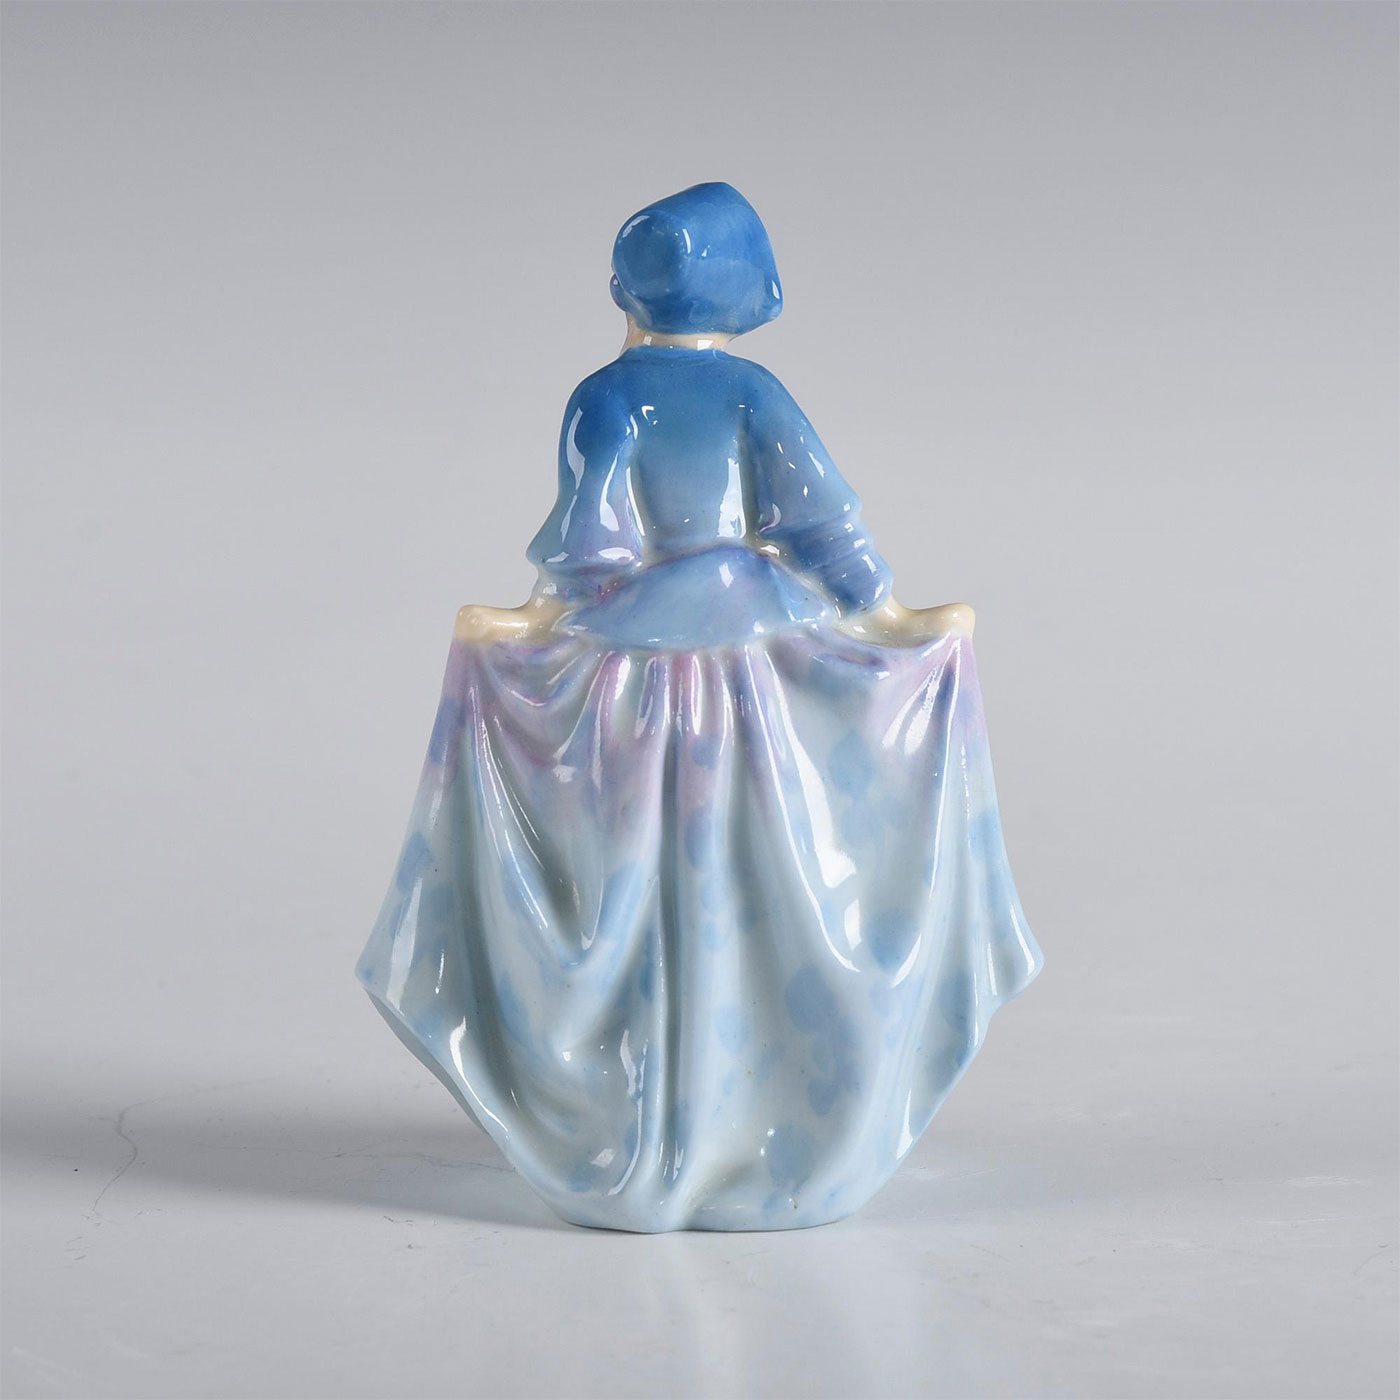 ROYAL DOULTON MINIATURE FIGURINE, SWEET ANNE - Image 3 of 5